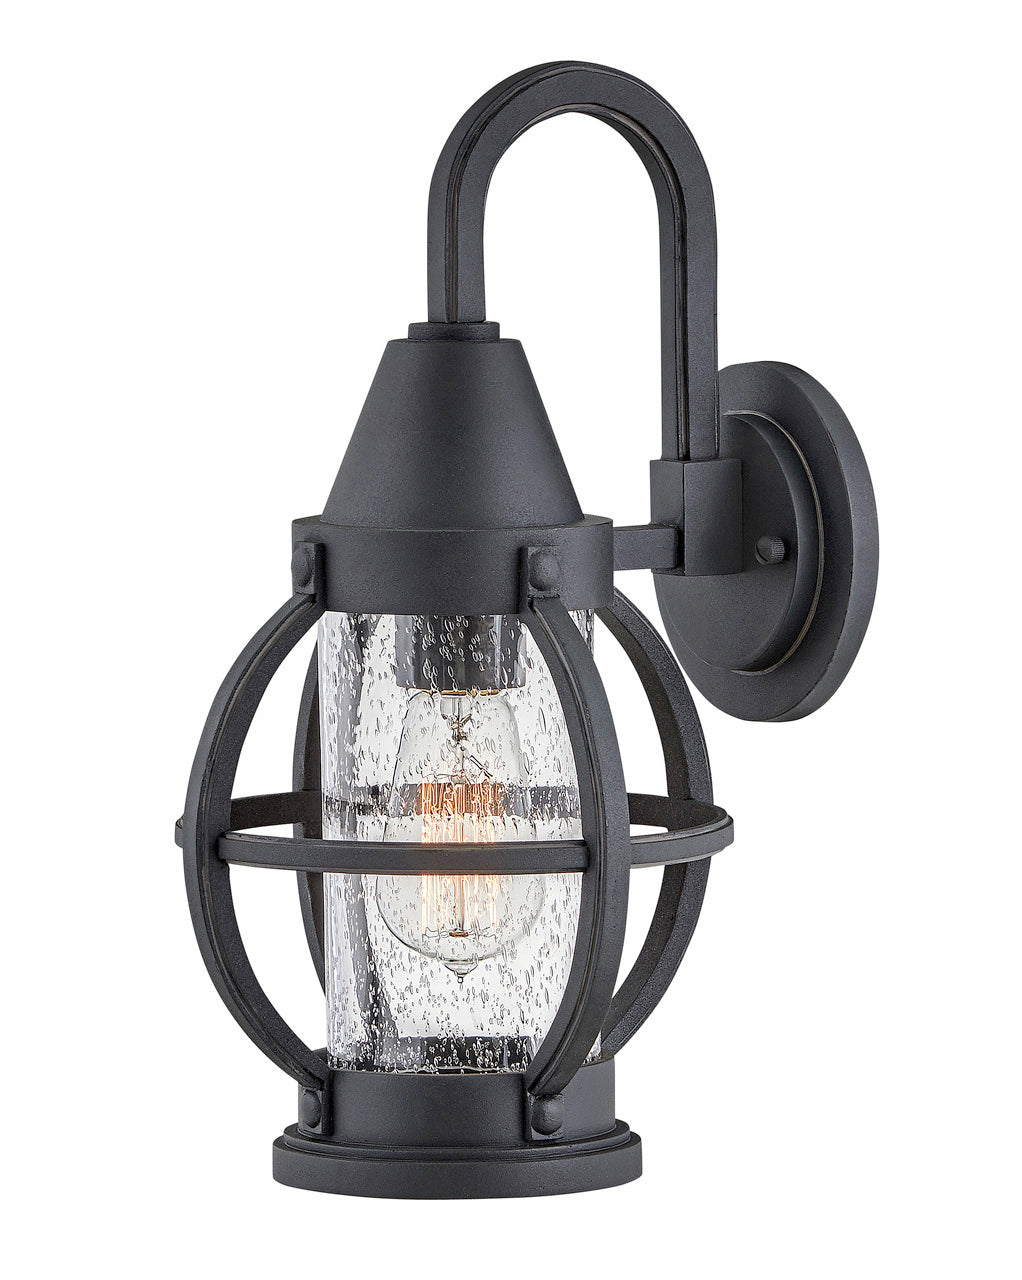 OUTDOOR CHATHAM Wall Mount Lantern Outdoor l Wall Hinkley Museum Black 9.5x8.25x15.0 